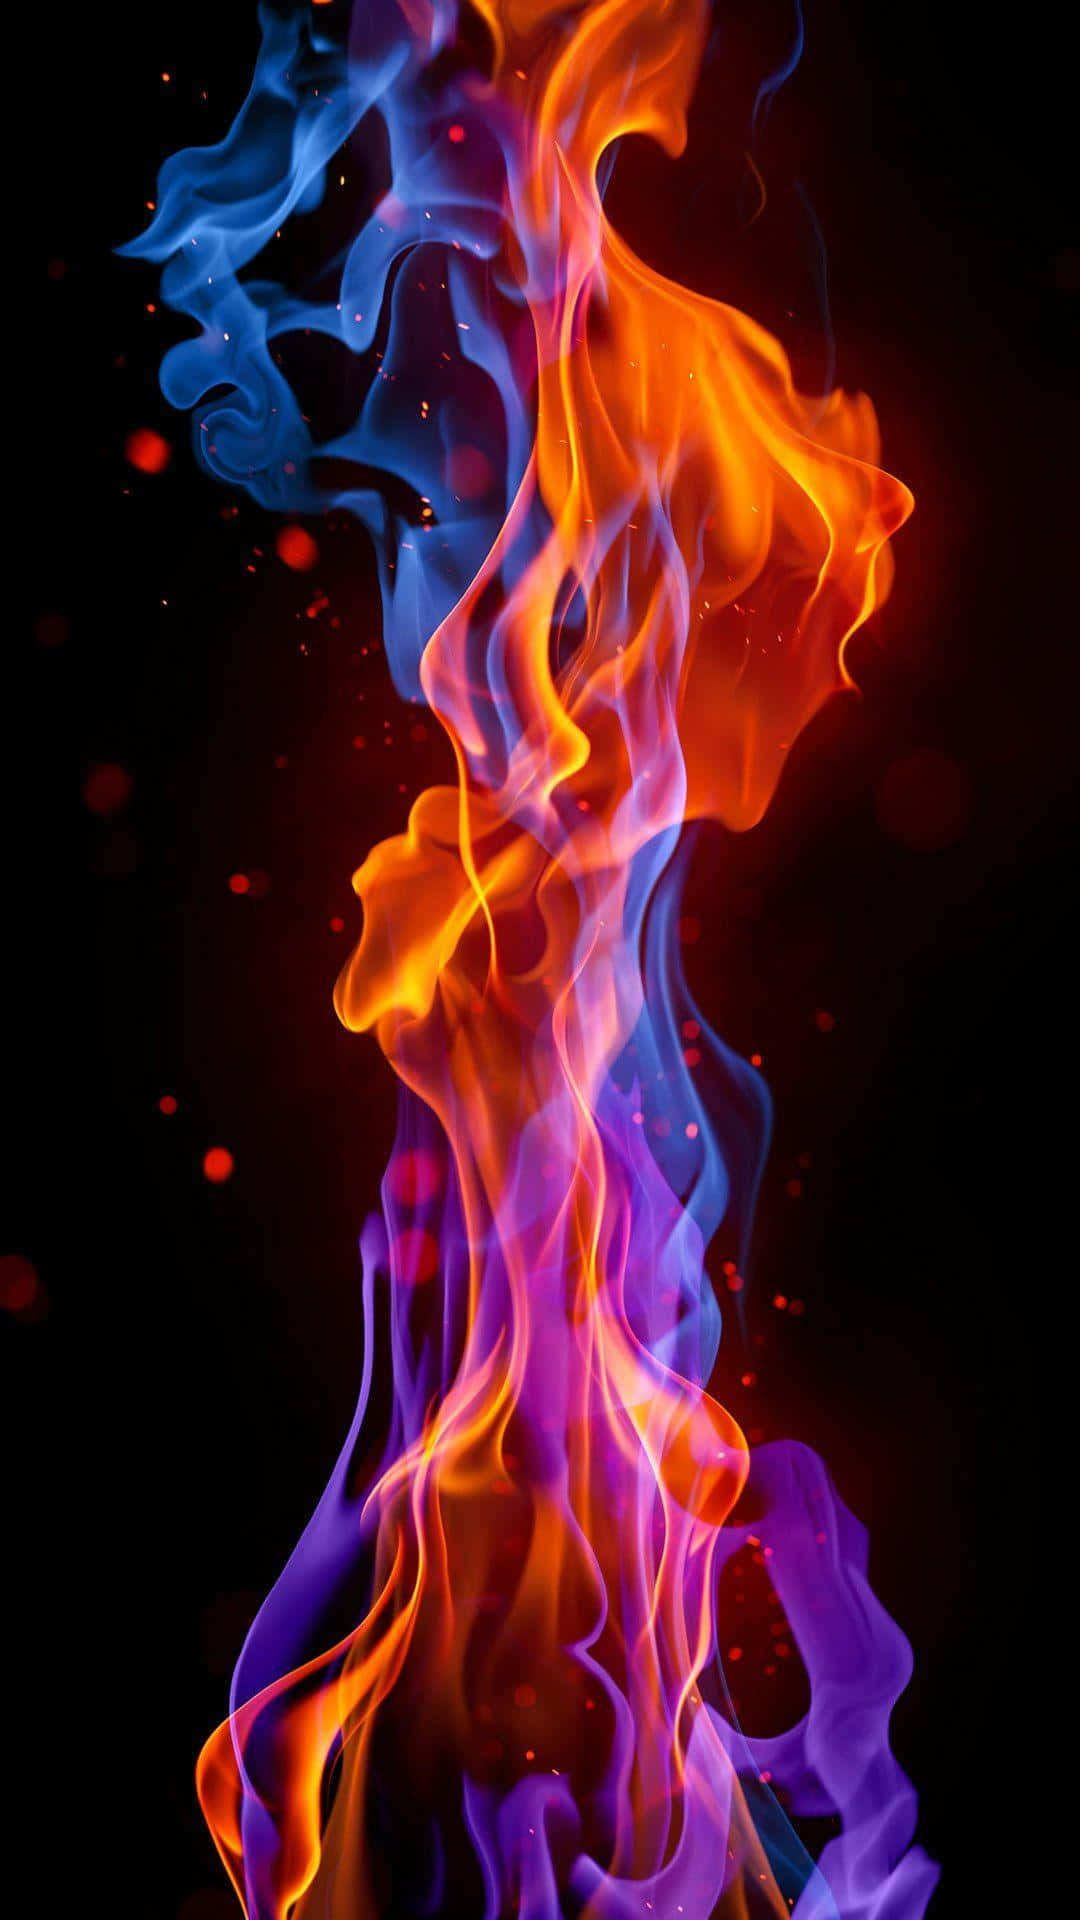 A Fire Flame On A Black Background Wallpaper